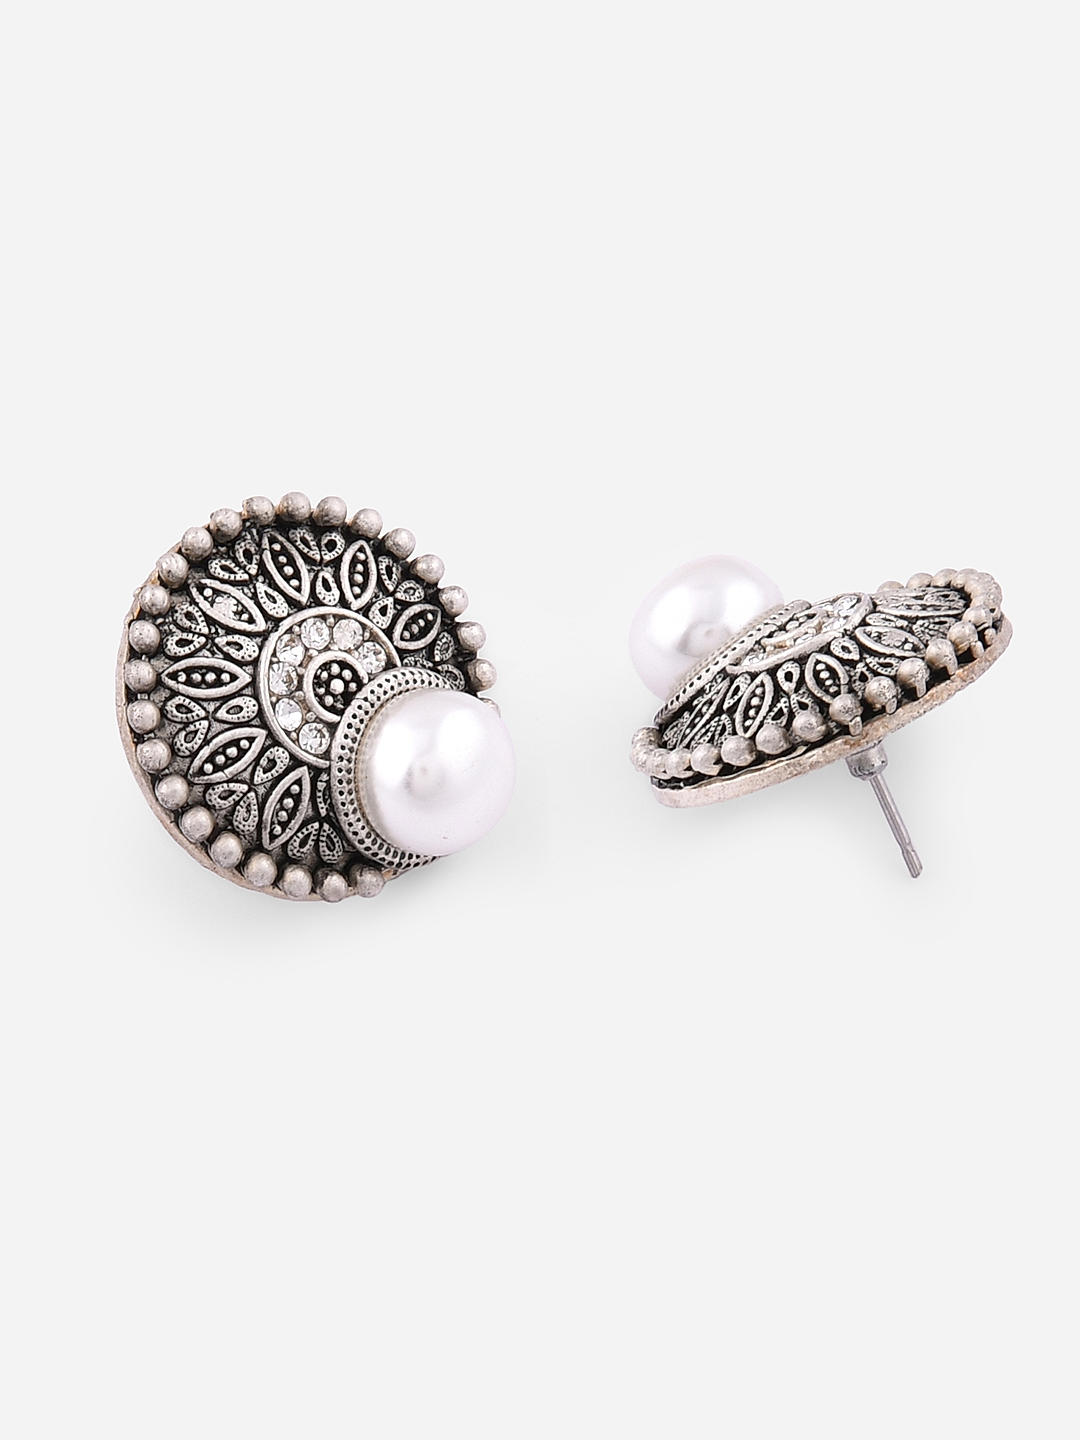 Abhooshan 925 Sterling Silver Pearl Stud Earrings For Kids Girls and Baby  Girls Latest and Stylish Gift for Daughter Sister Friend Birthday   Amazonin Fashion